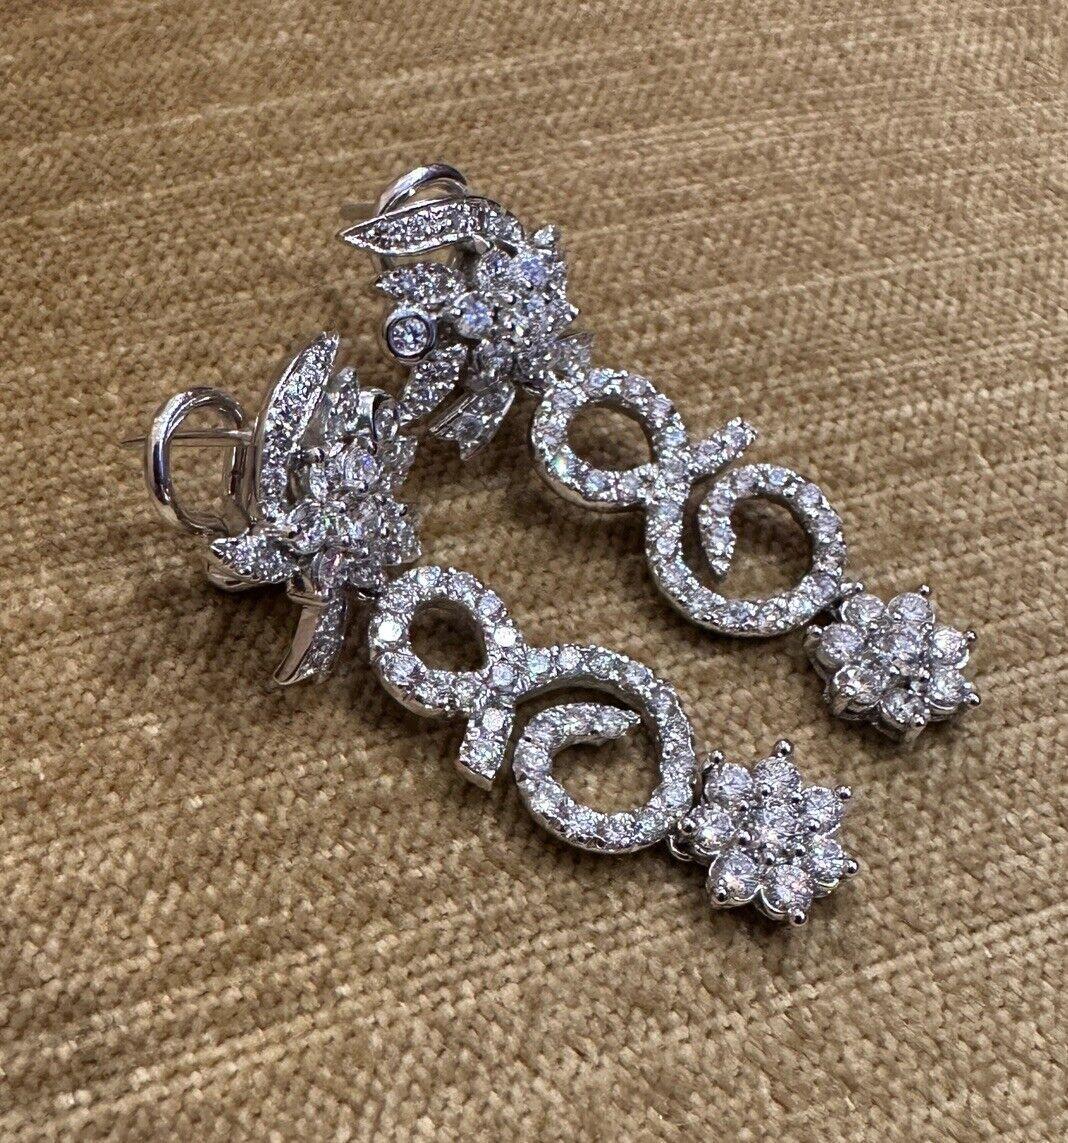 Flower Diamond Drop Earrings 3.00 carat total weight in 14k White gold 

Diamond Drop Earrings features a Floral Scroll Drop Motif with Round Brilliant Diamonds set in 14k White Gold.

The total diamond weight is estimated to be 3.00